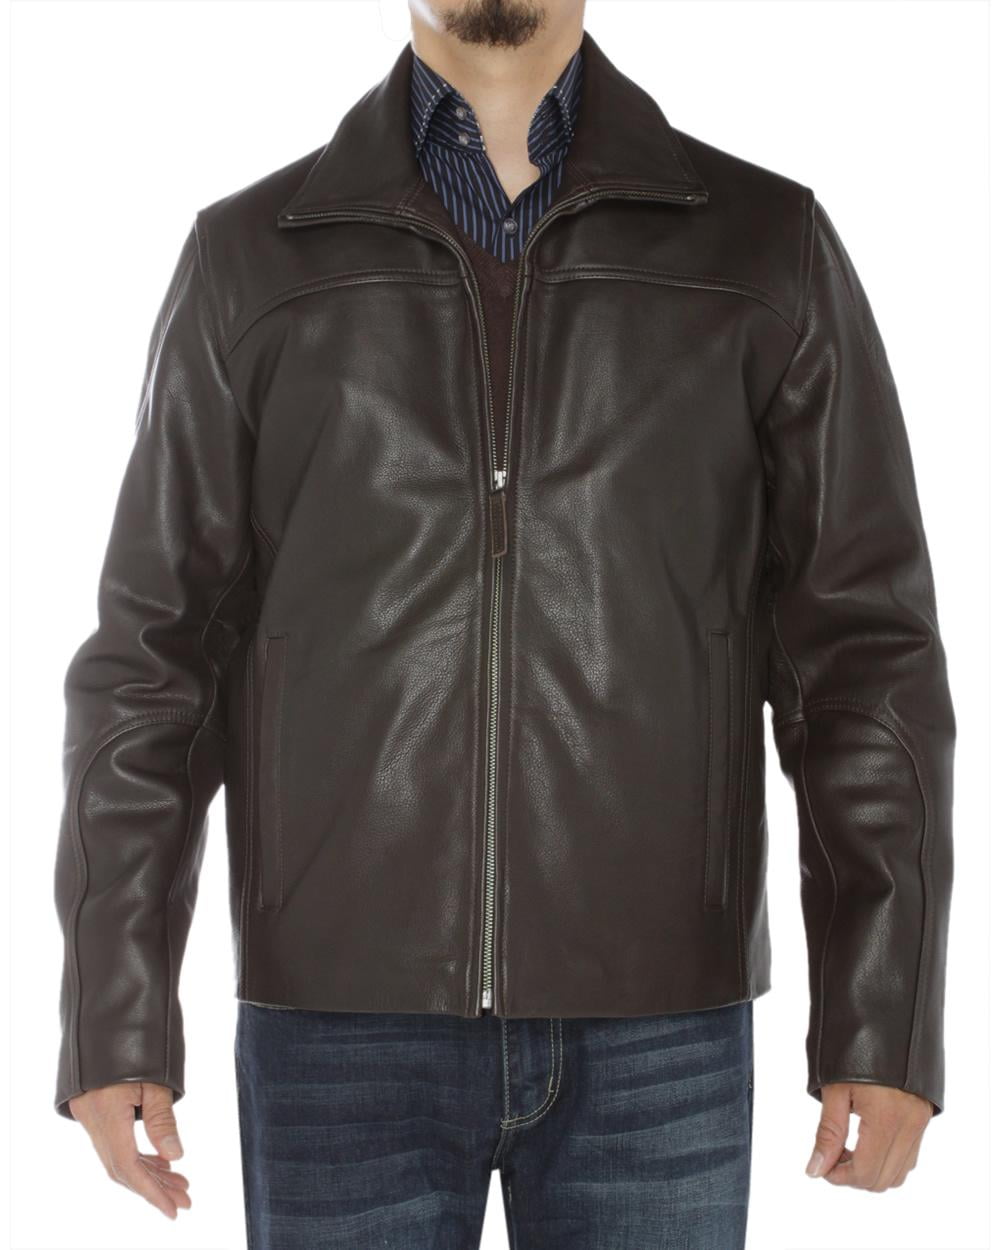 LN LUCIANO NATAZZI Men's Classic Full Grain Cow Leather Jacket Brown ...